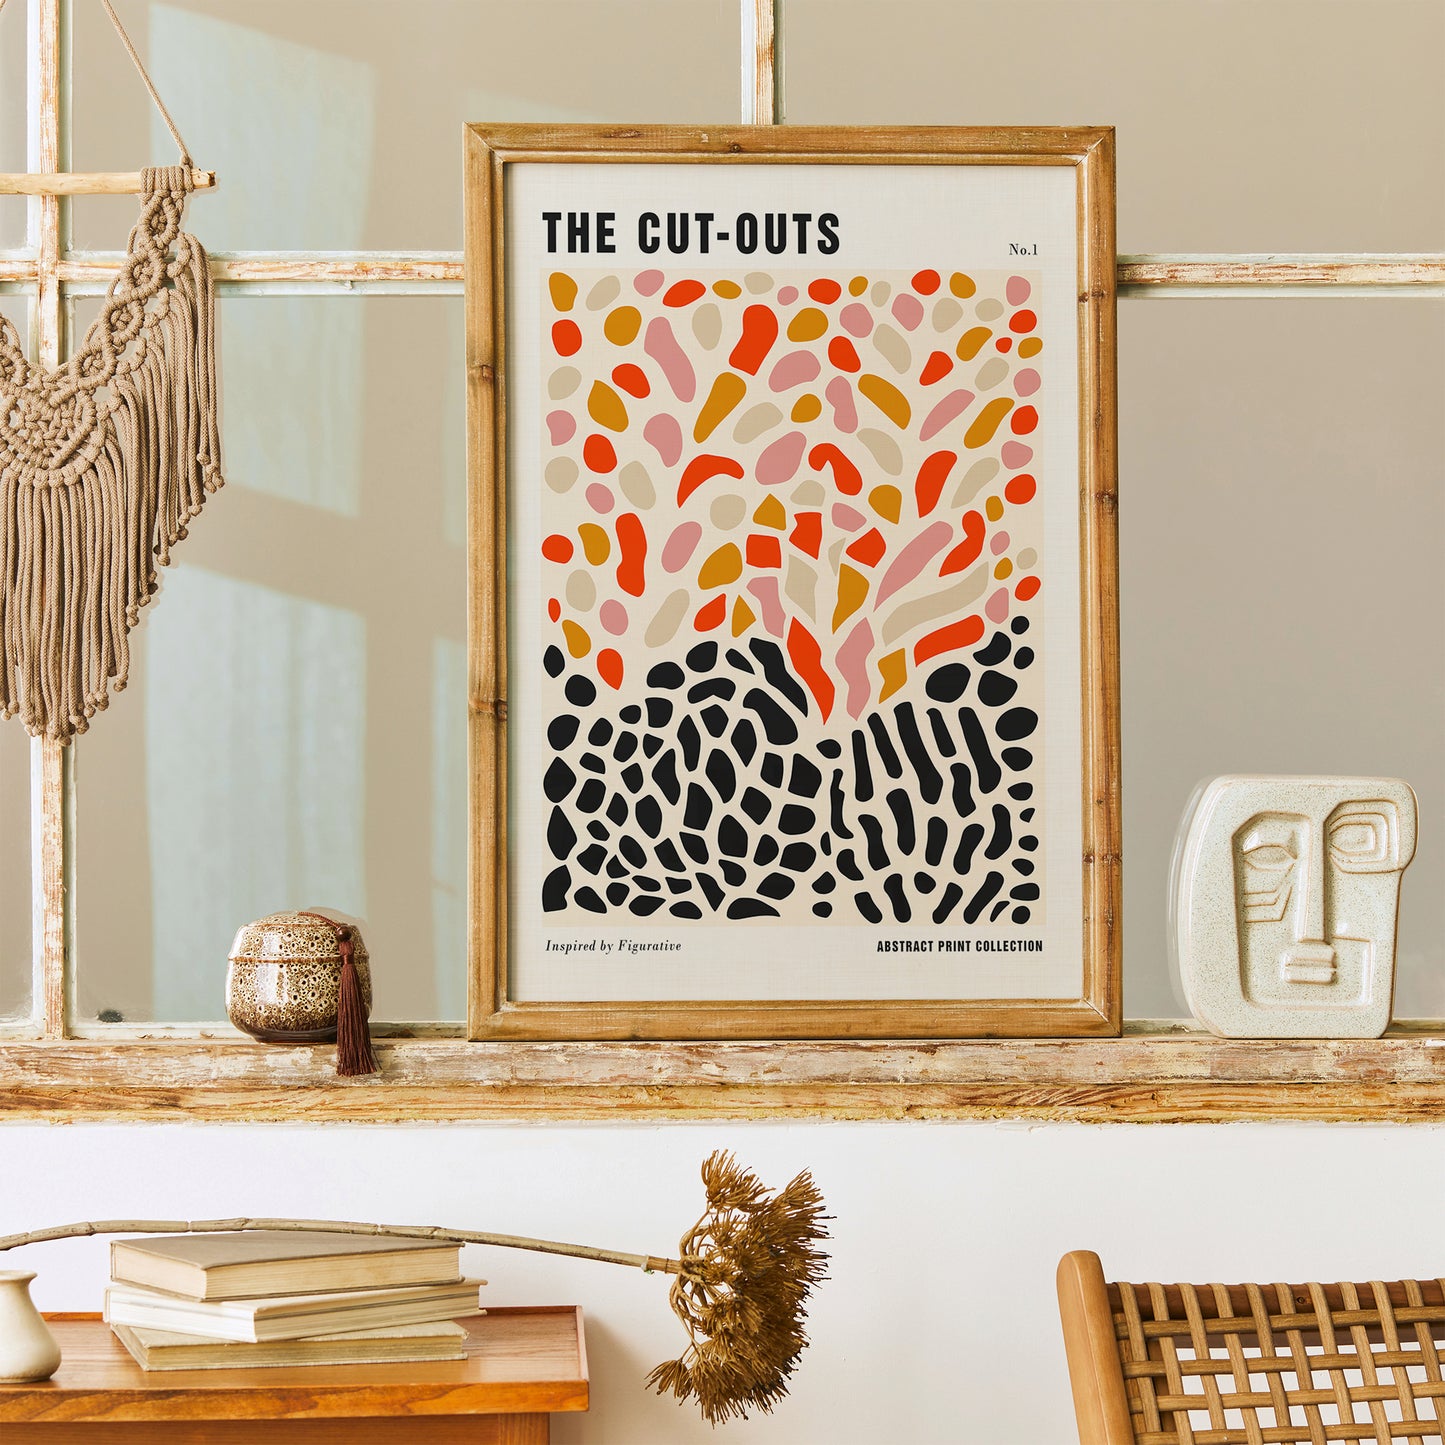 Mid Century Cut Outs Print